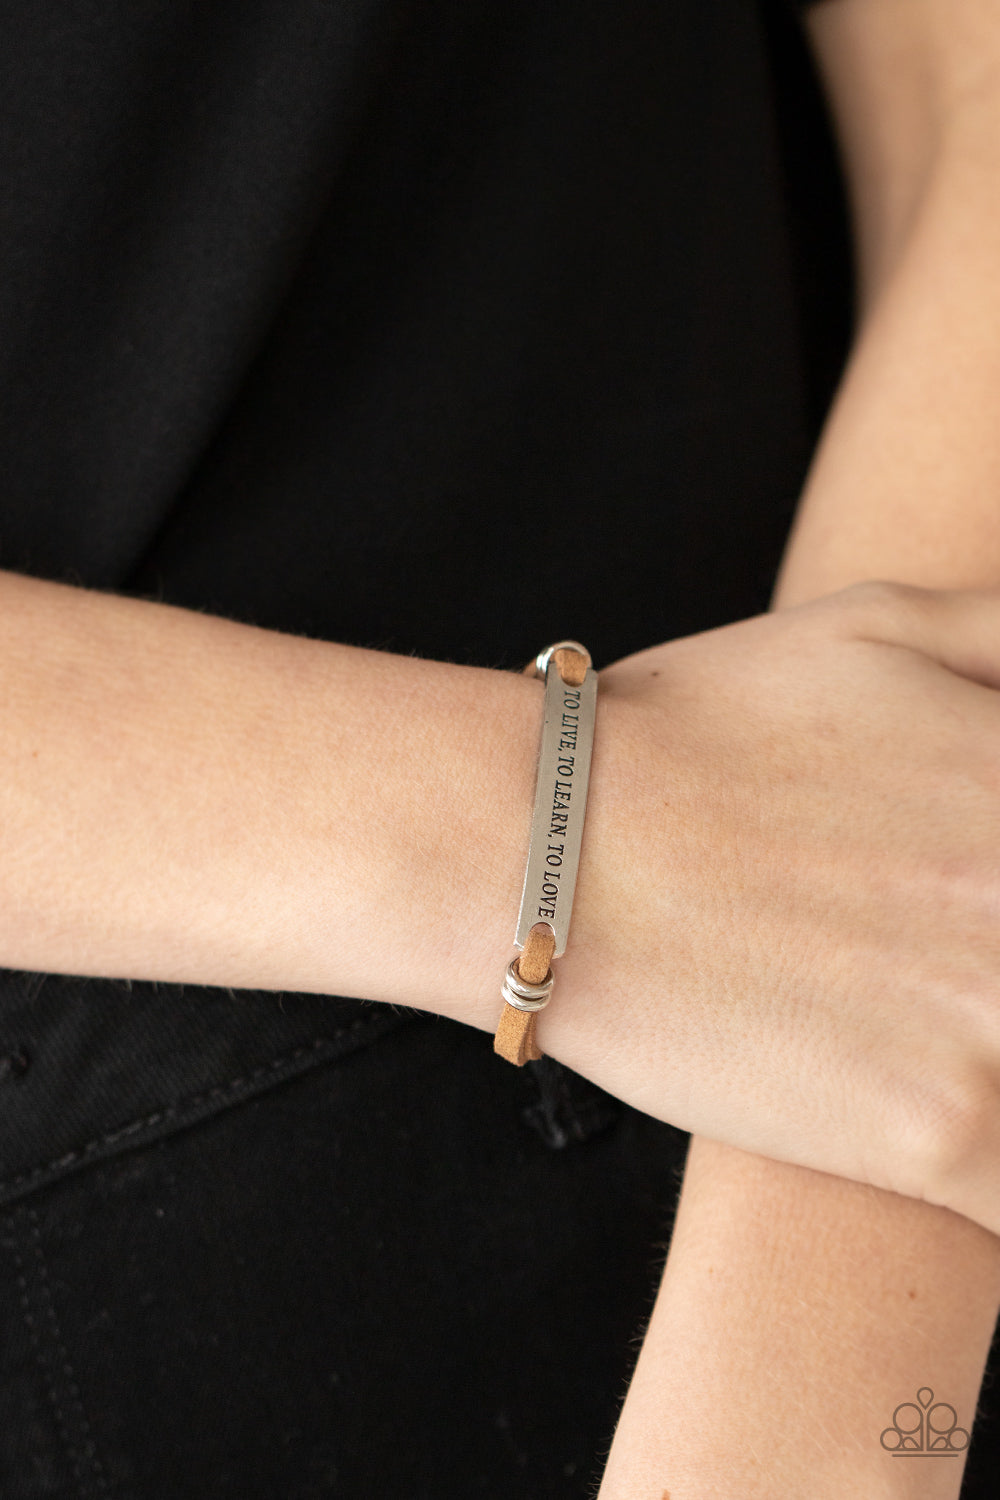 To Live, To Learn, To Love Brown
Bracelet Paparazzi